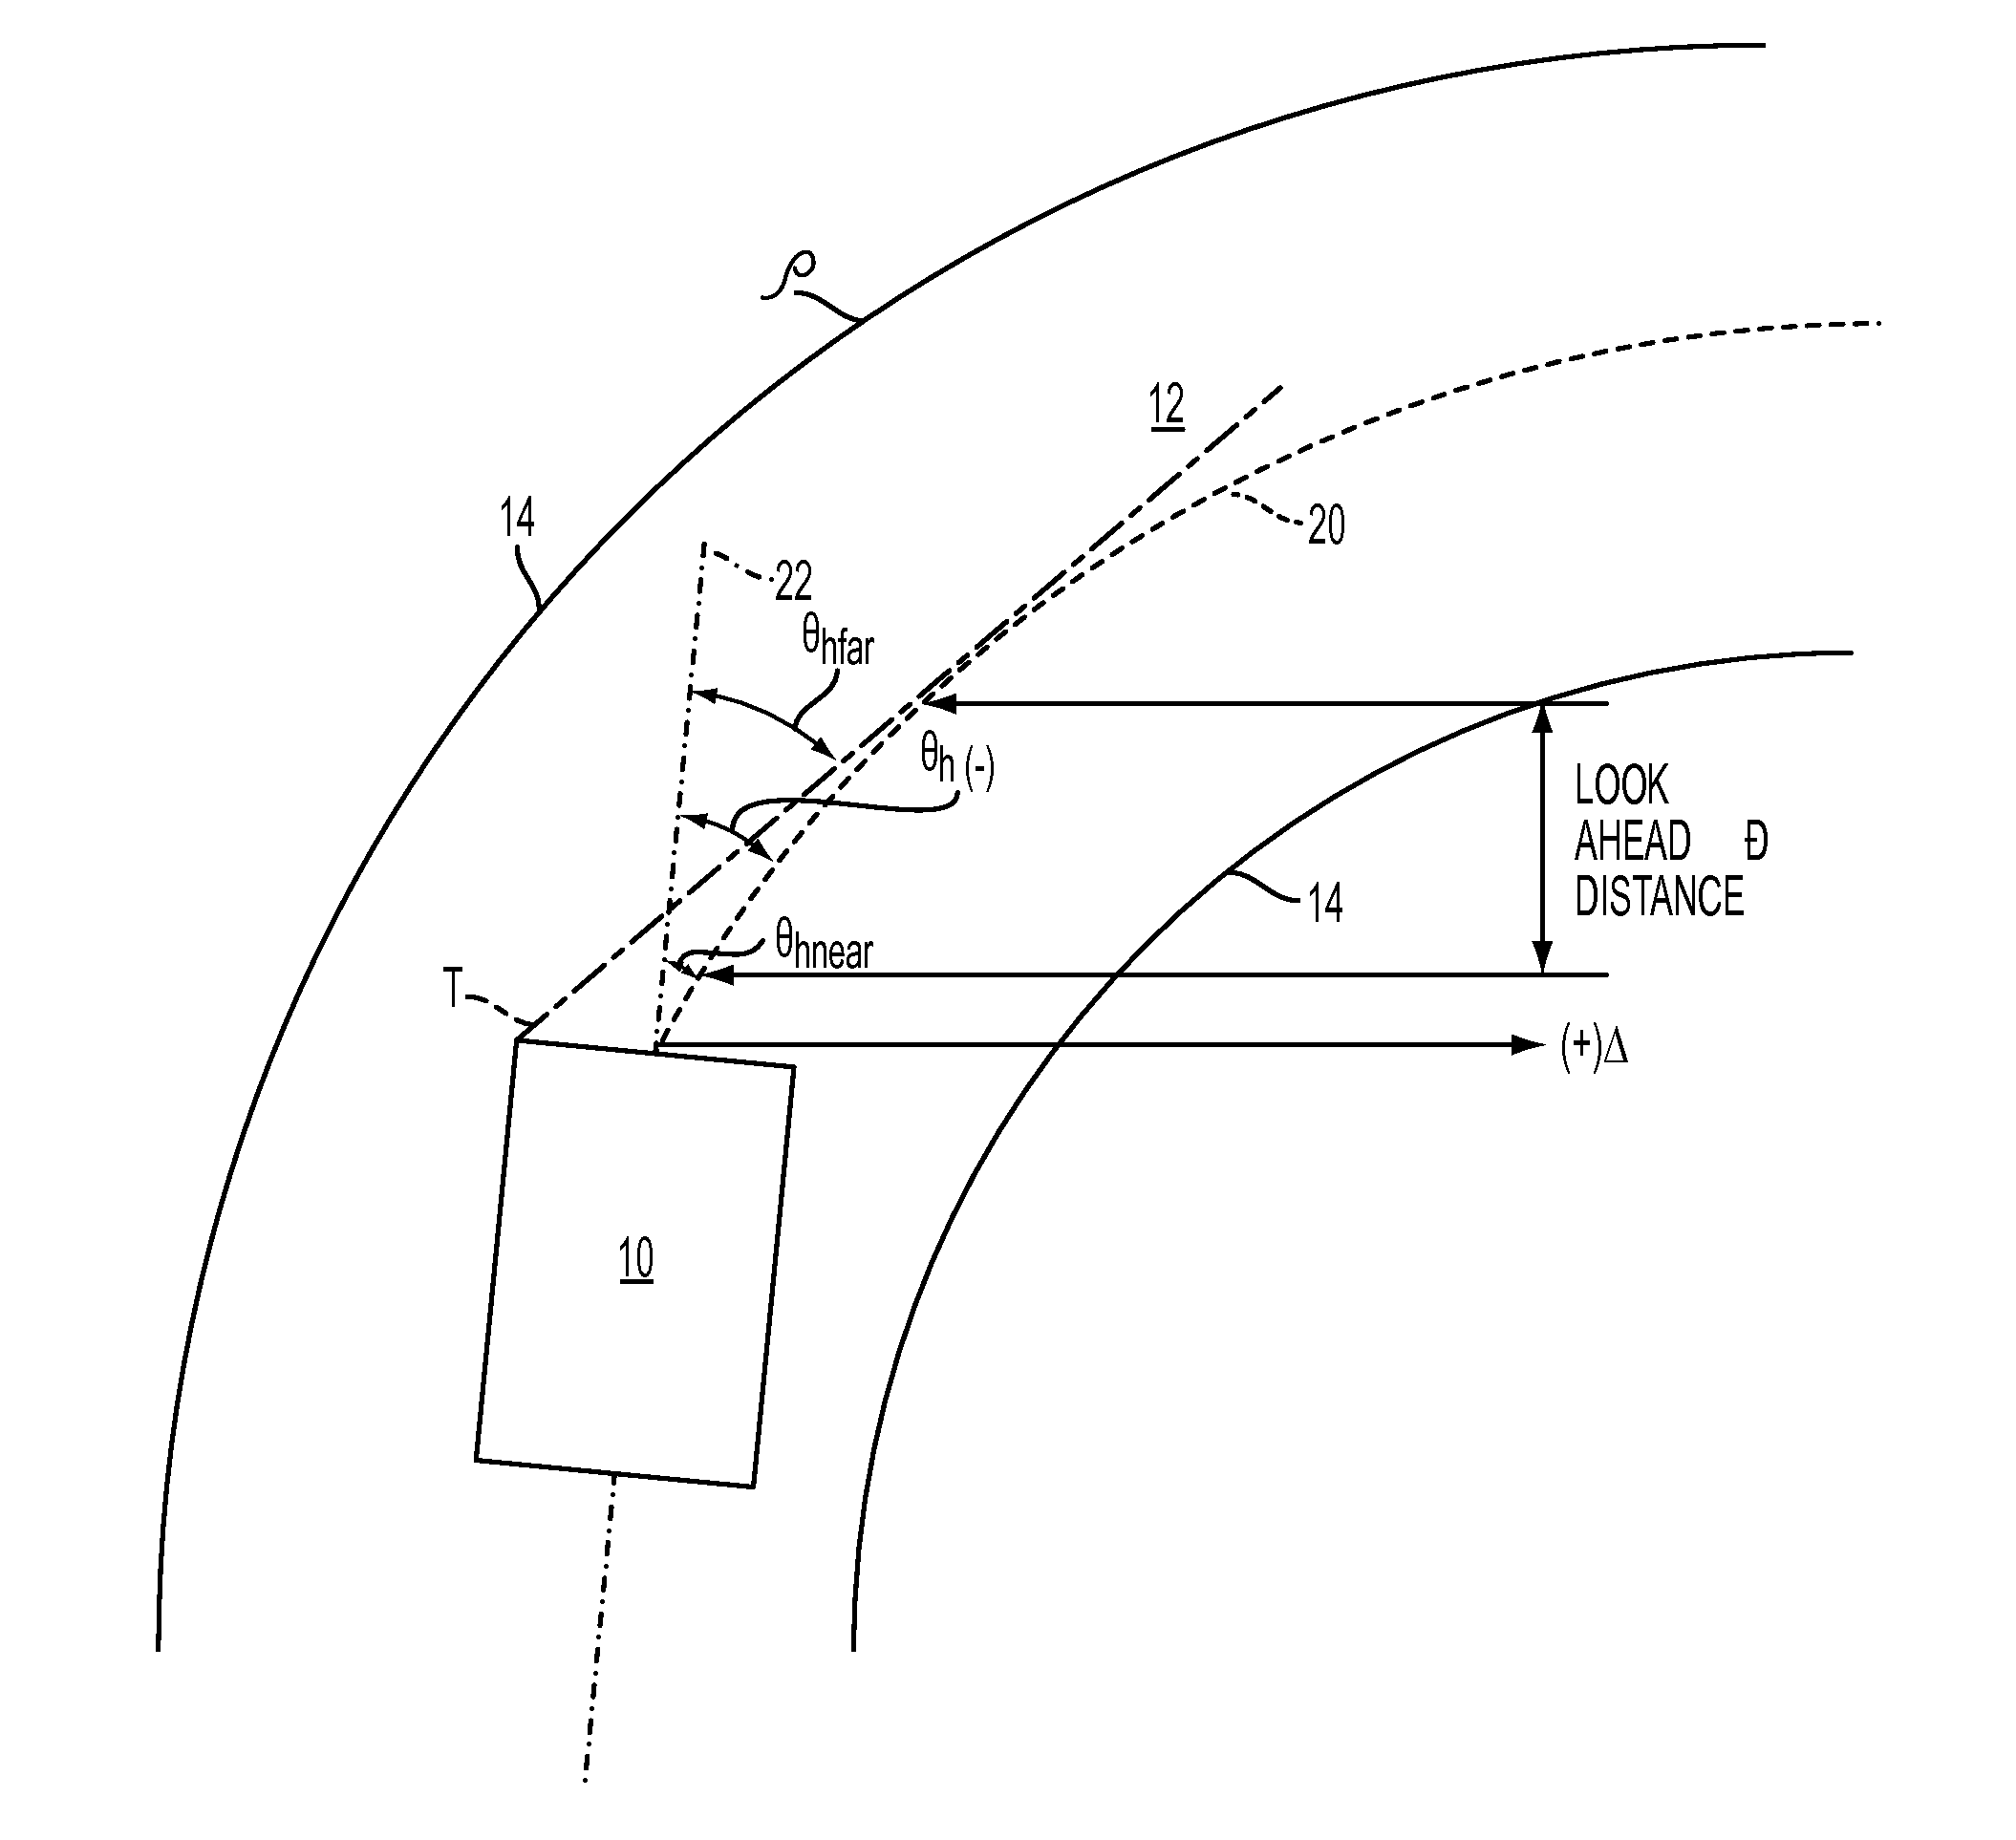 System for providing steering assist torque based on a proportional gain value